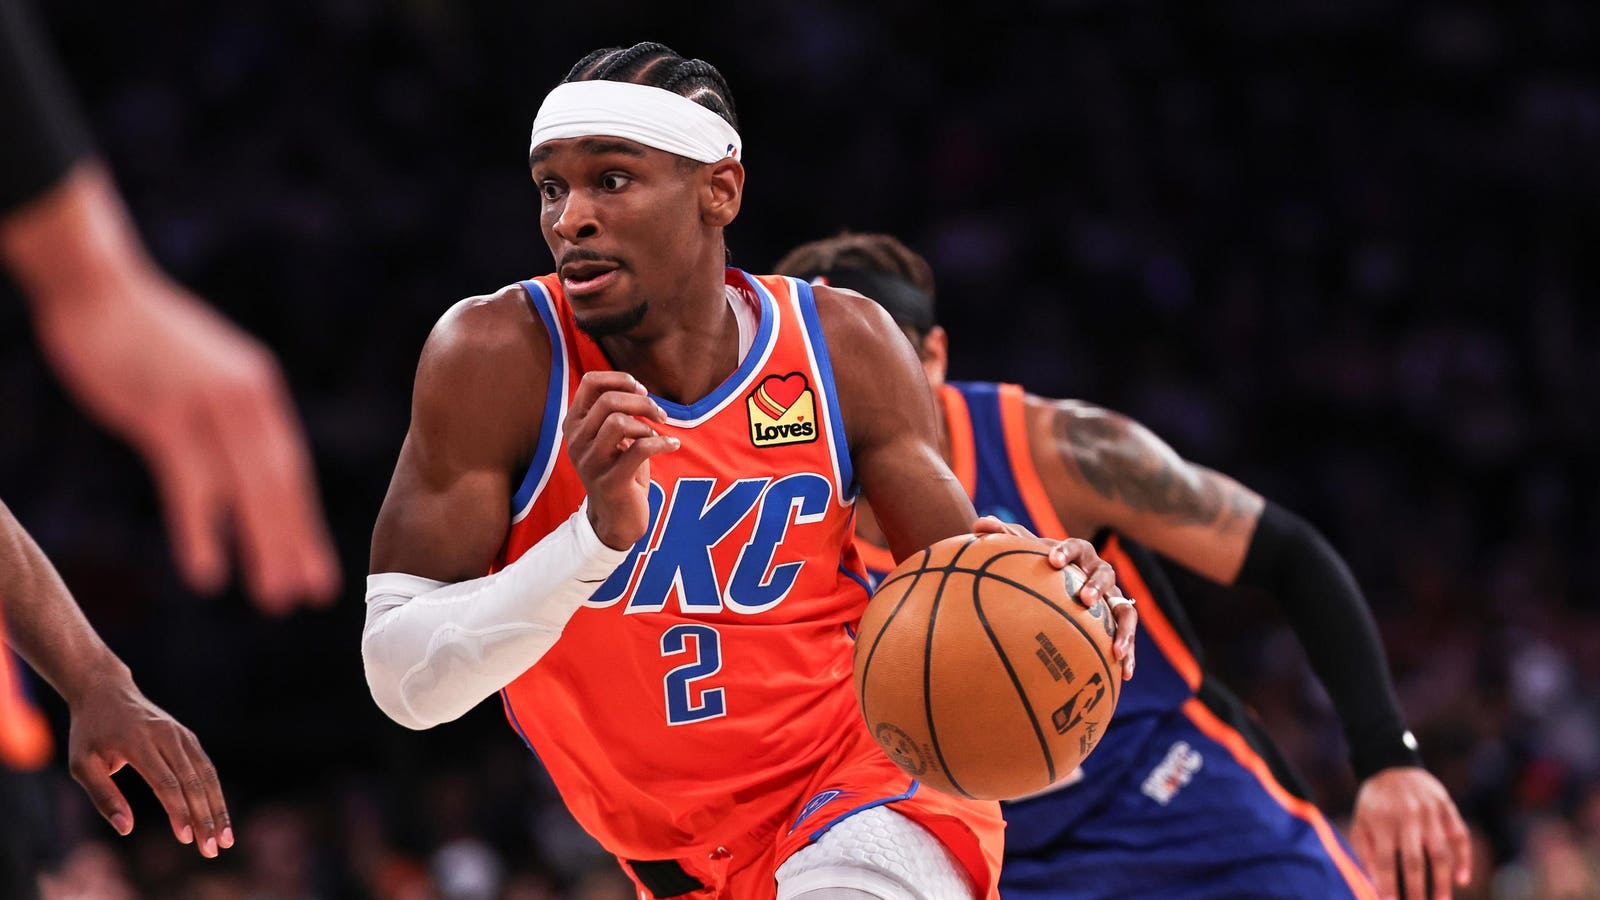 Thunder’s Shai Gilgeous-Alexander Continues To Climb League Ladder With Runner-Up MVP Finish